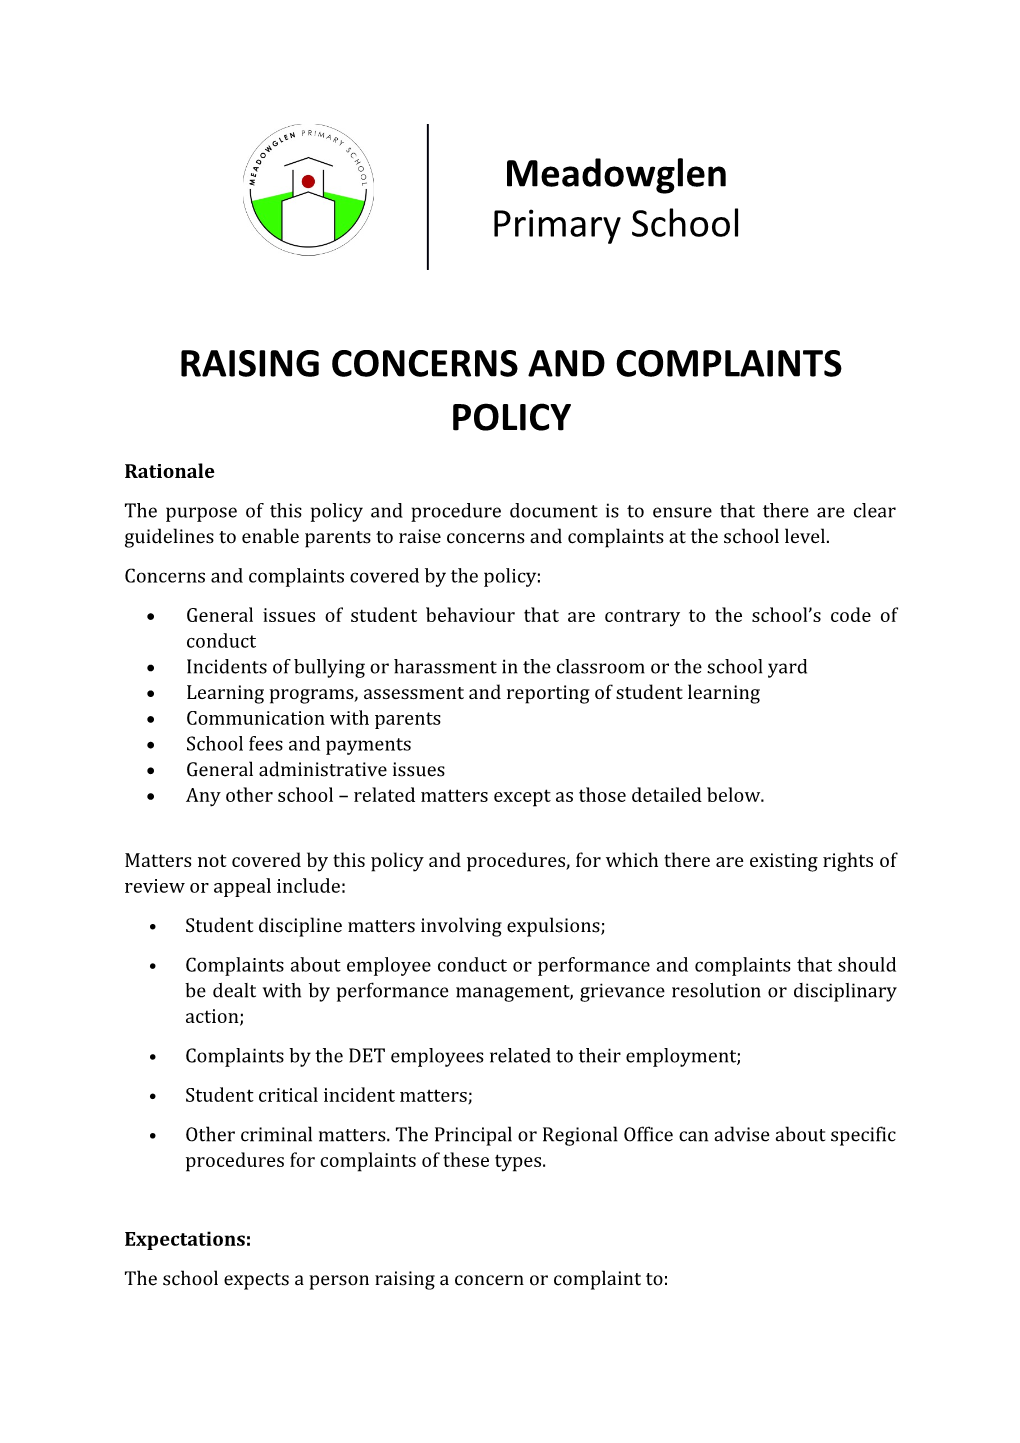 Raising Concerns and Complaints Policy